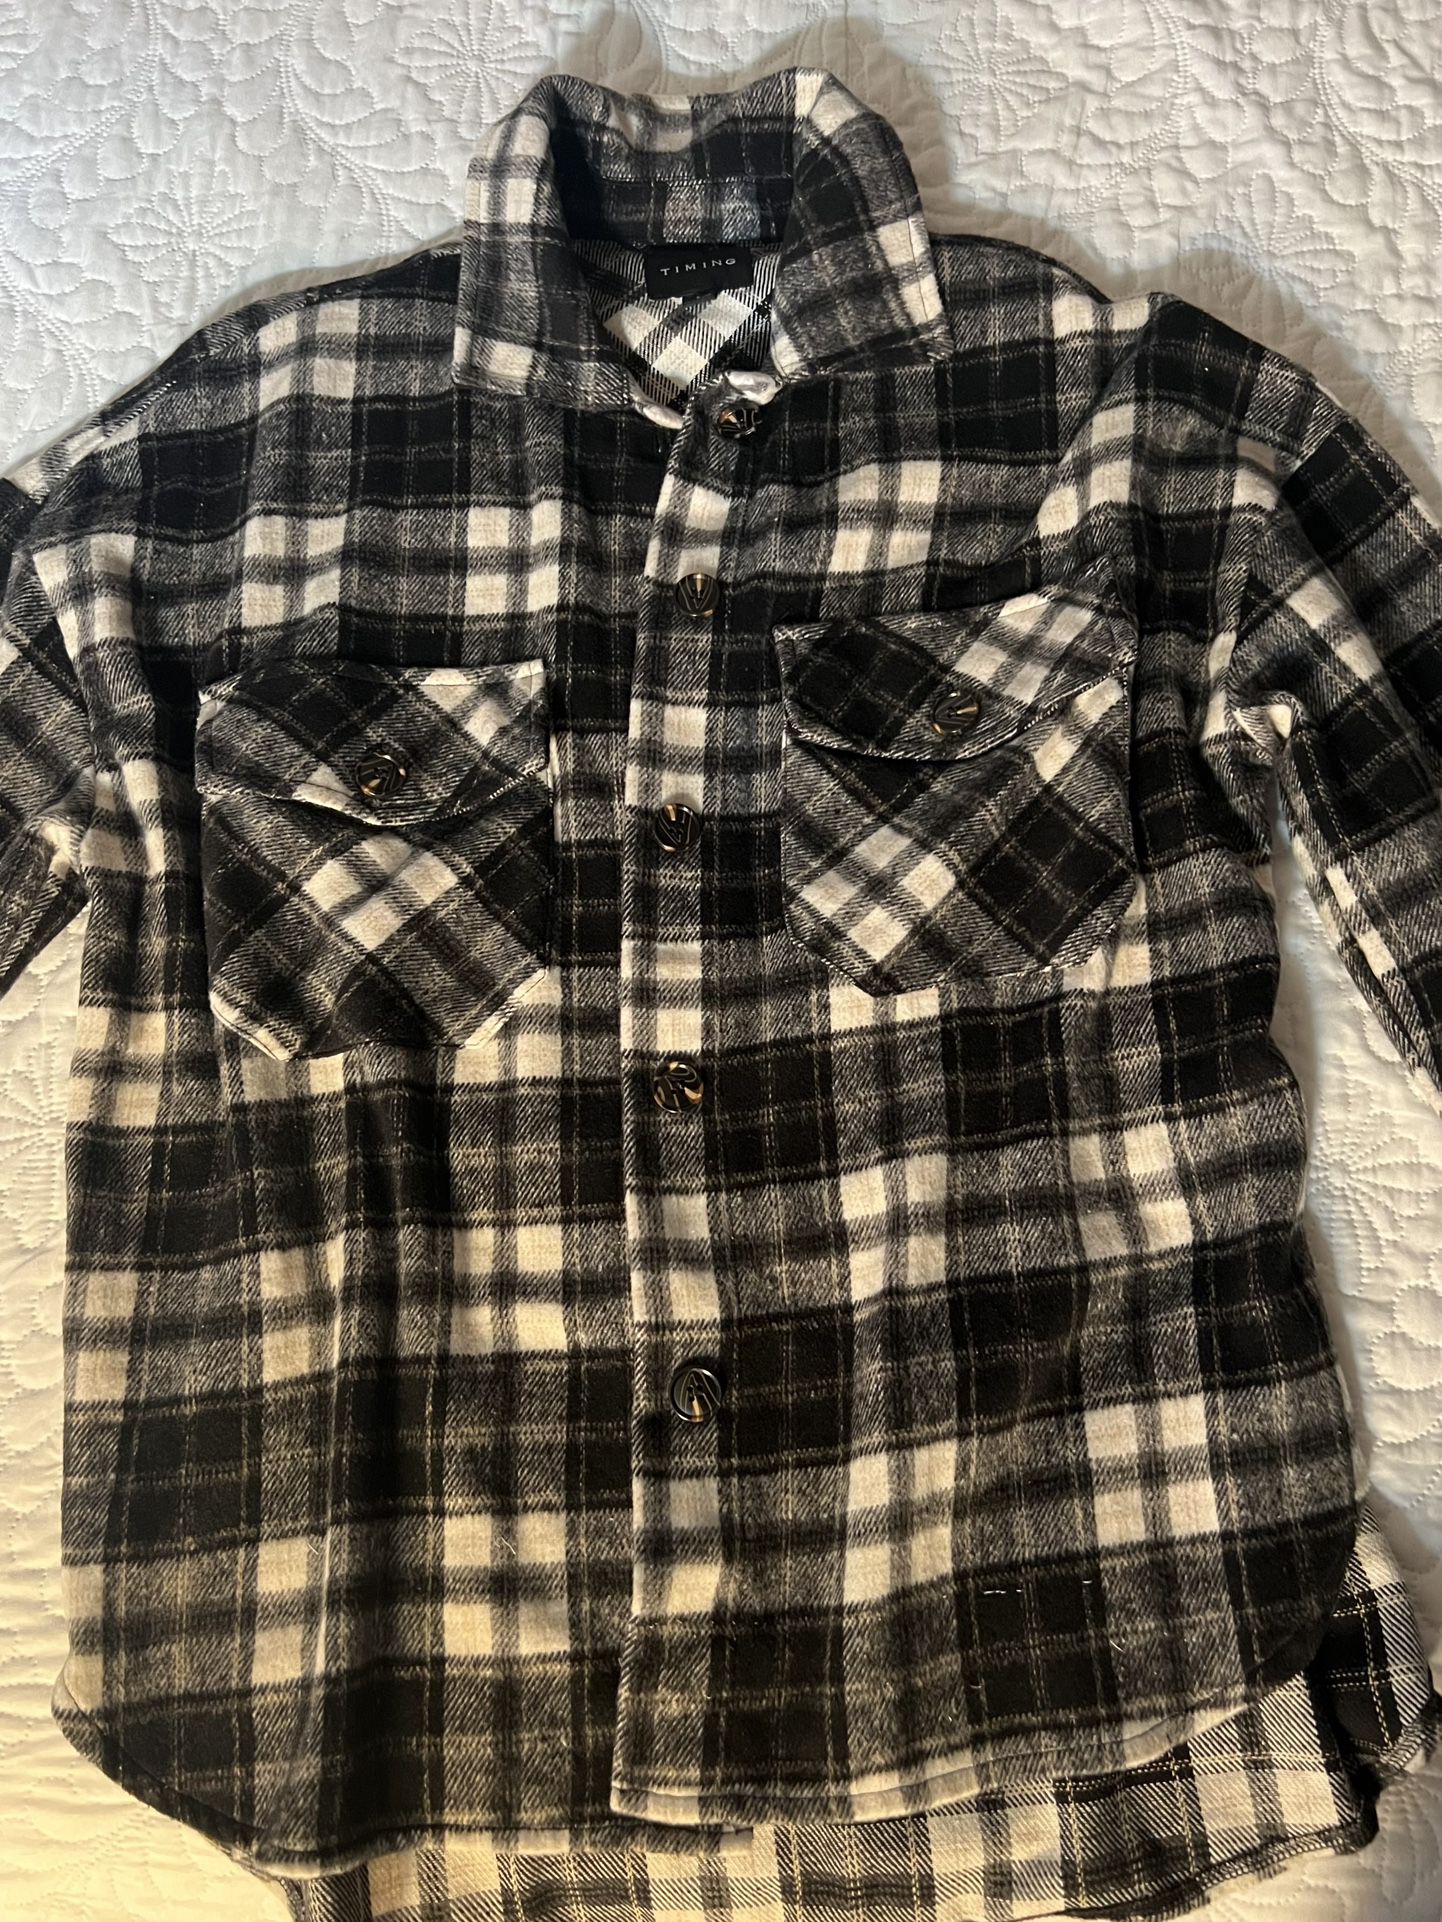 black and white flannel